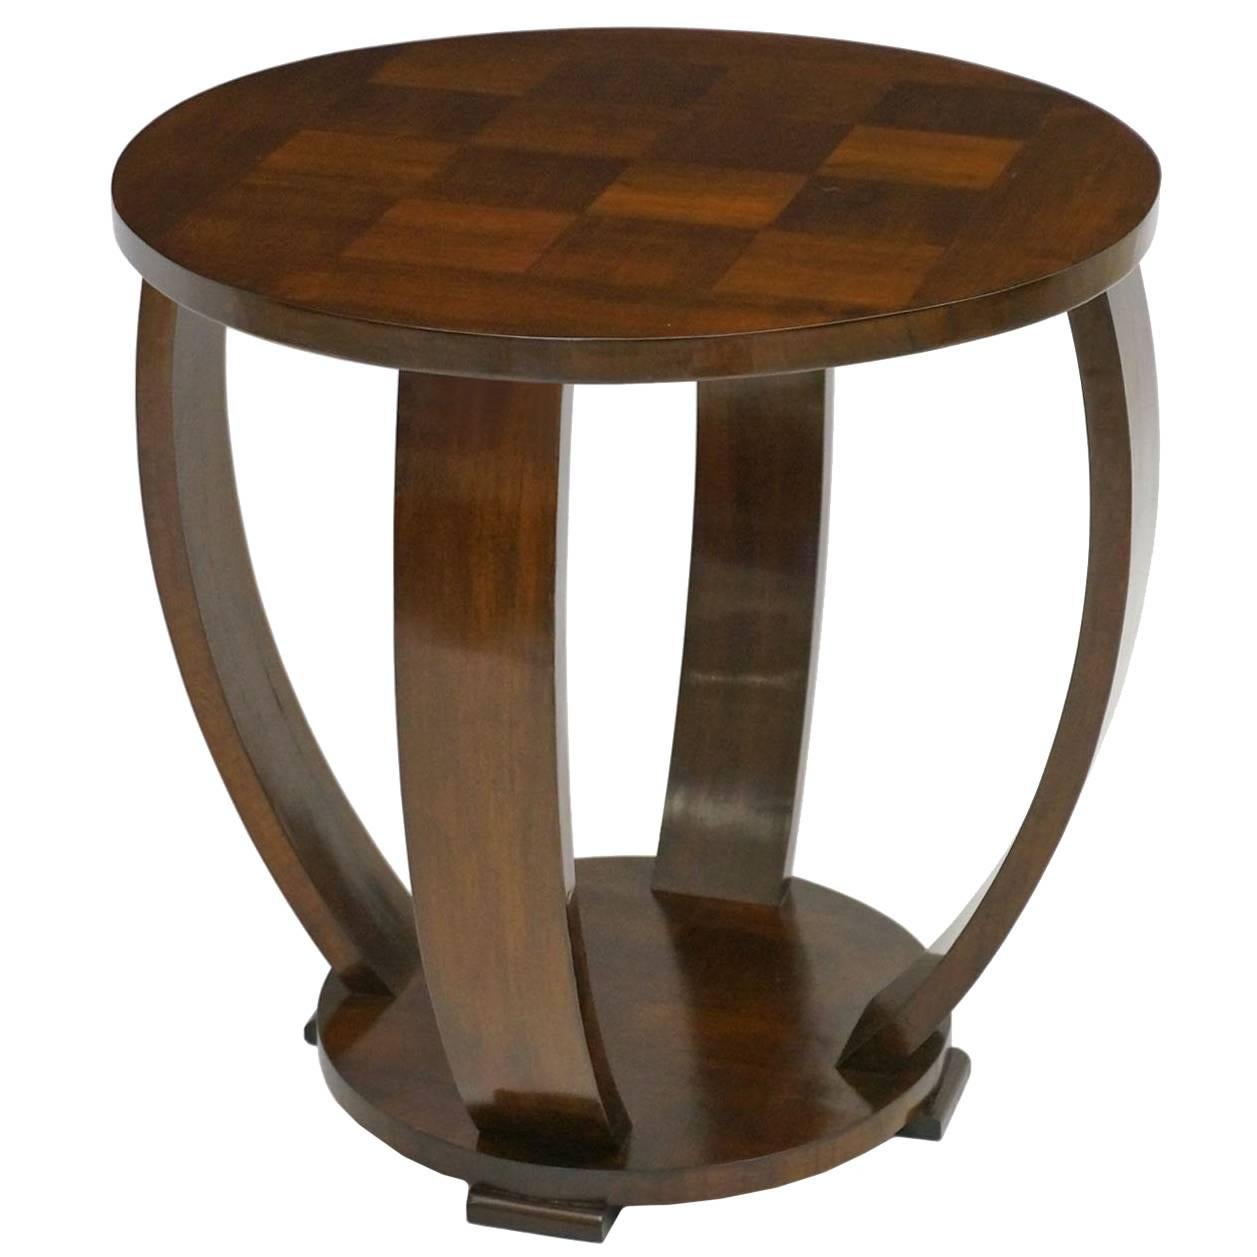 French Art Deco Circular Walnut Wood Side Table with Curved Supports, circa 1930